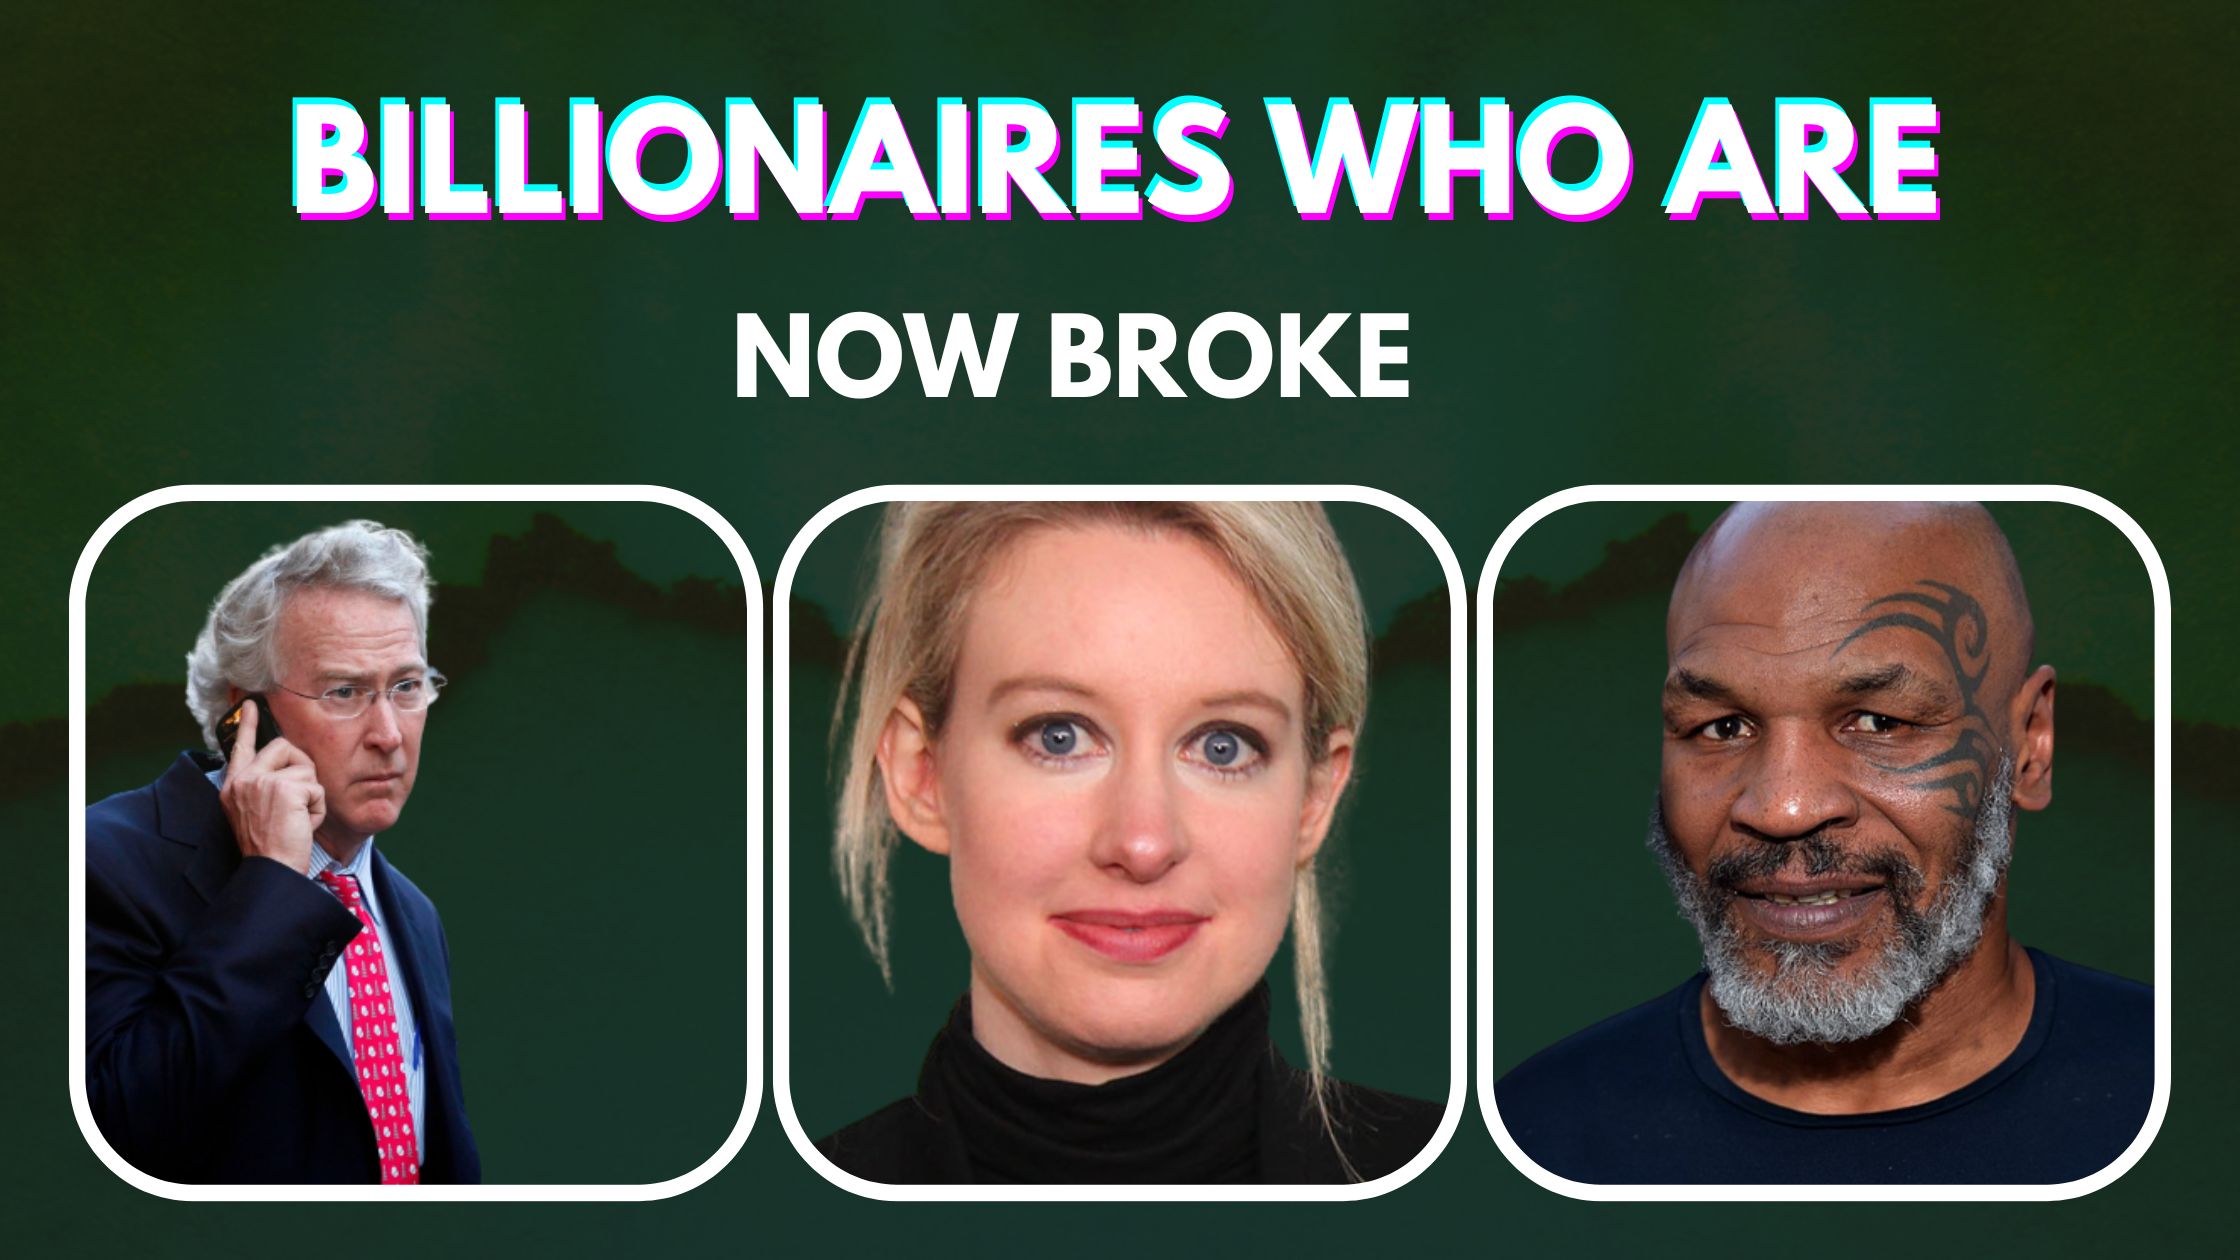 Top 10 Billionaires Who Are Now Broke (2022)